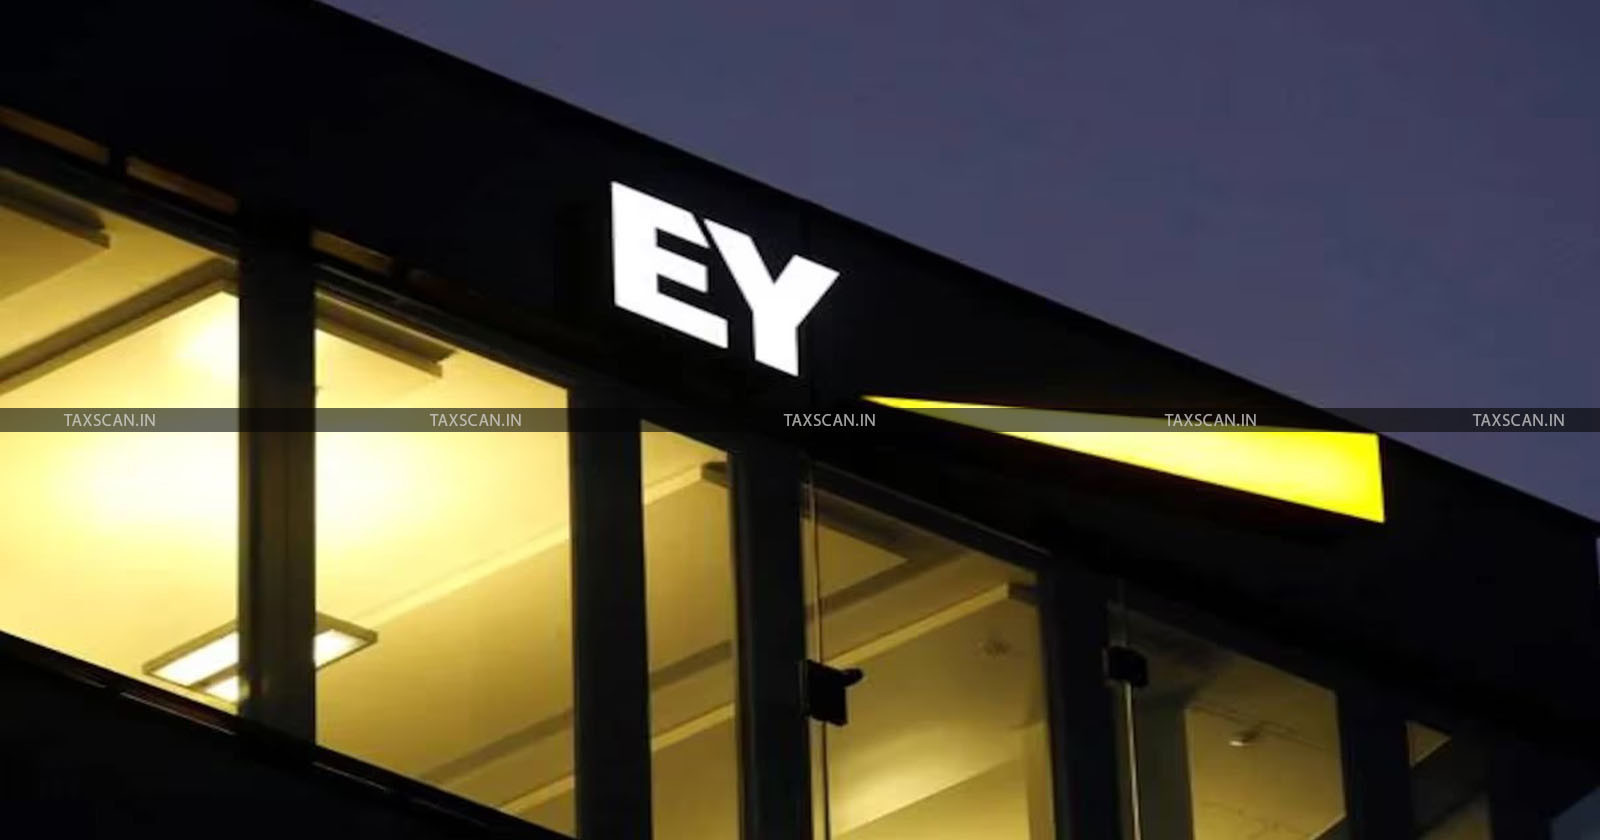 ca careers in ey - ca opportunities in ey - ernst & young - ca jobs in ey - chartered accountant vacancy in ey - taxscan